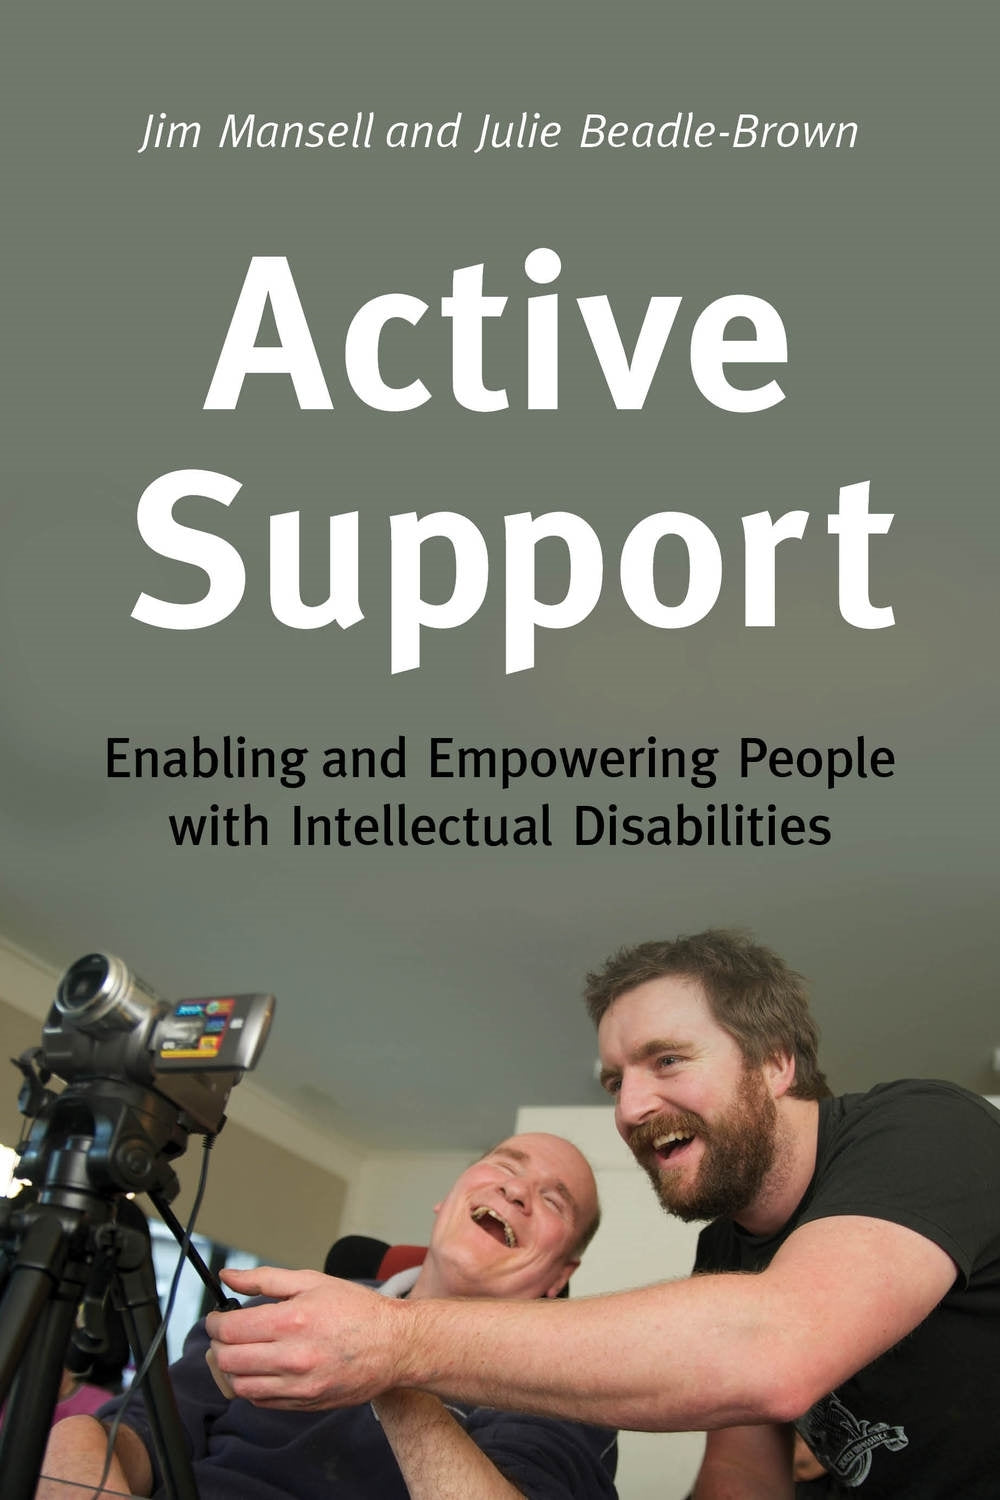 Active Support by Julie Beadle-Brown, Jim Mansell